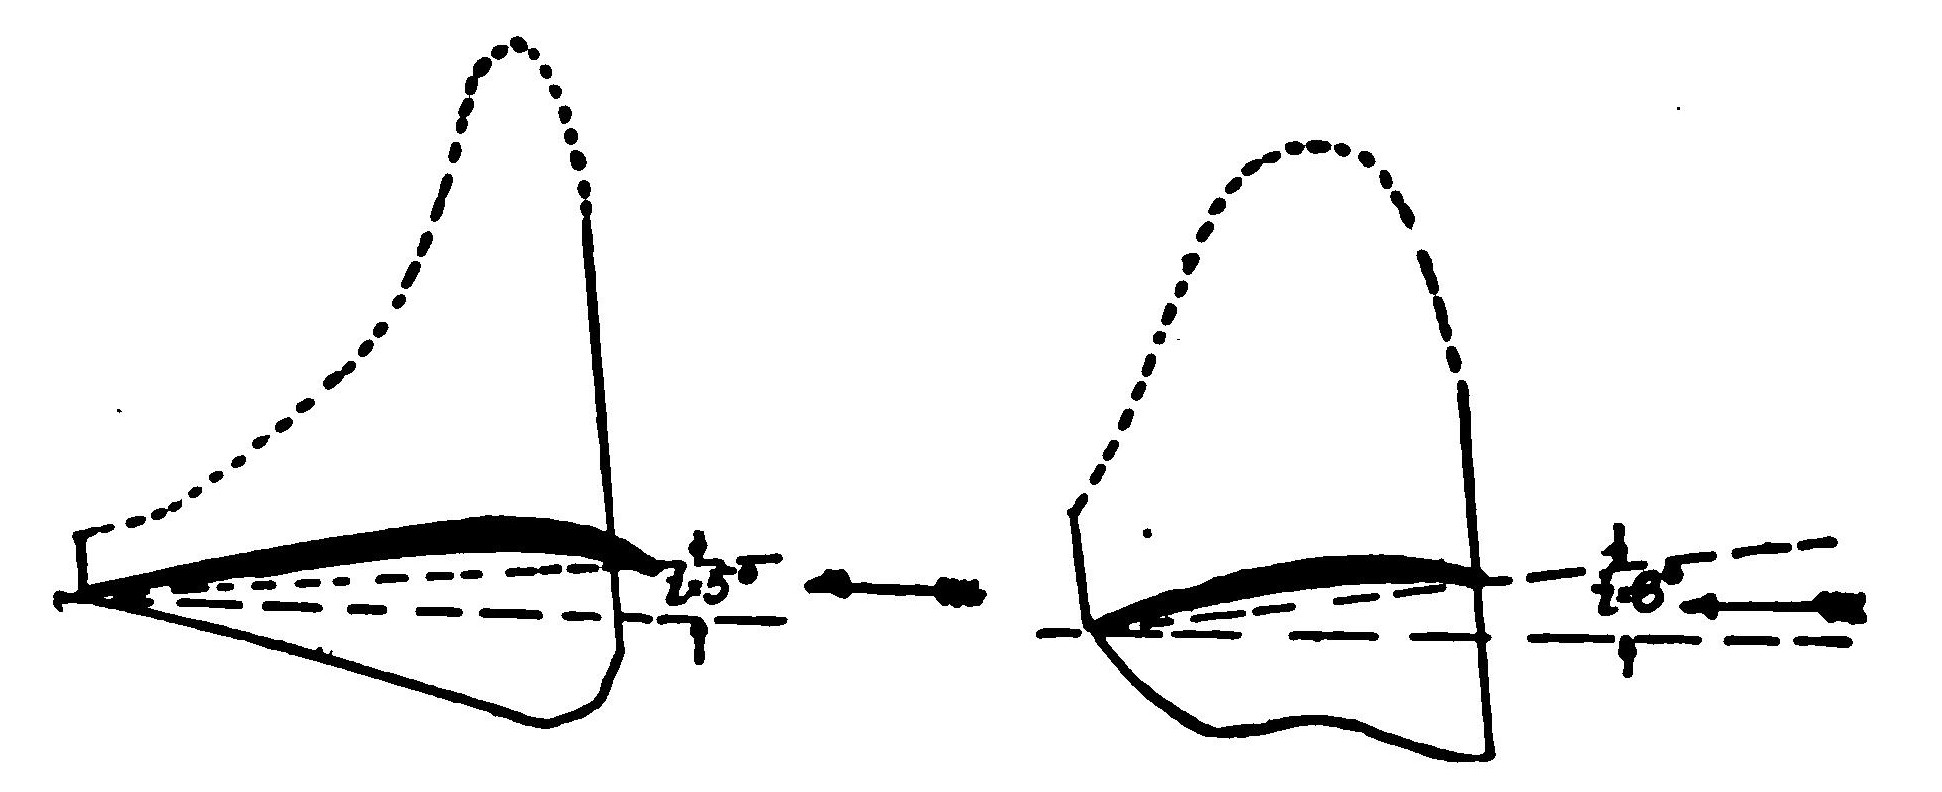 Fig. 14. Drzwiecki Tandem Wing Arrangement for Stability.